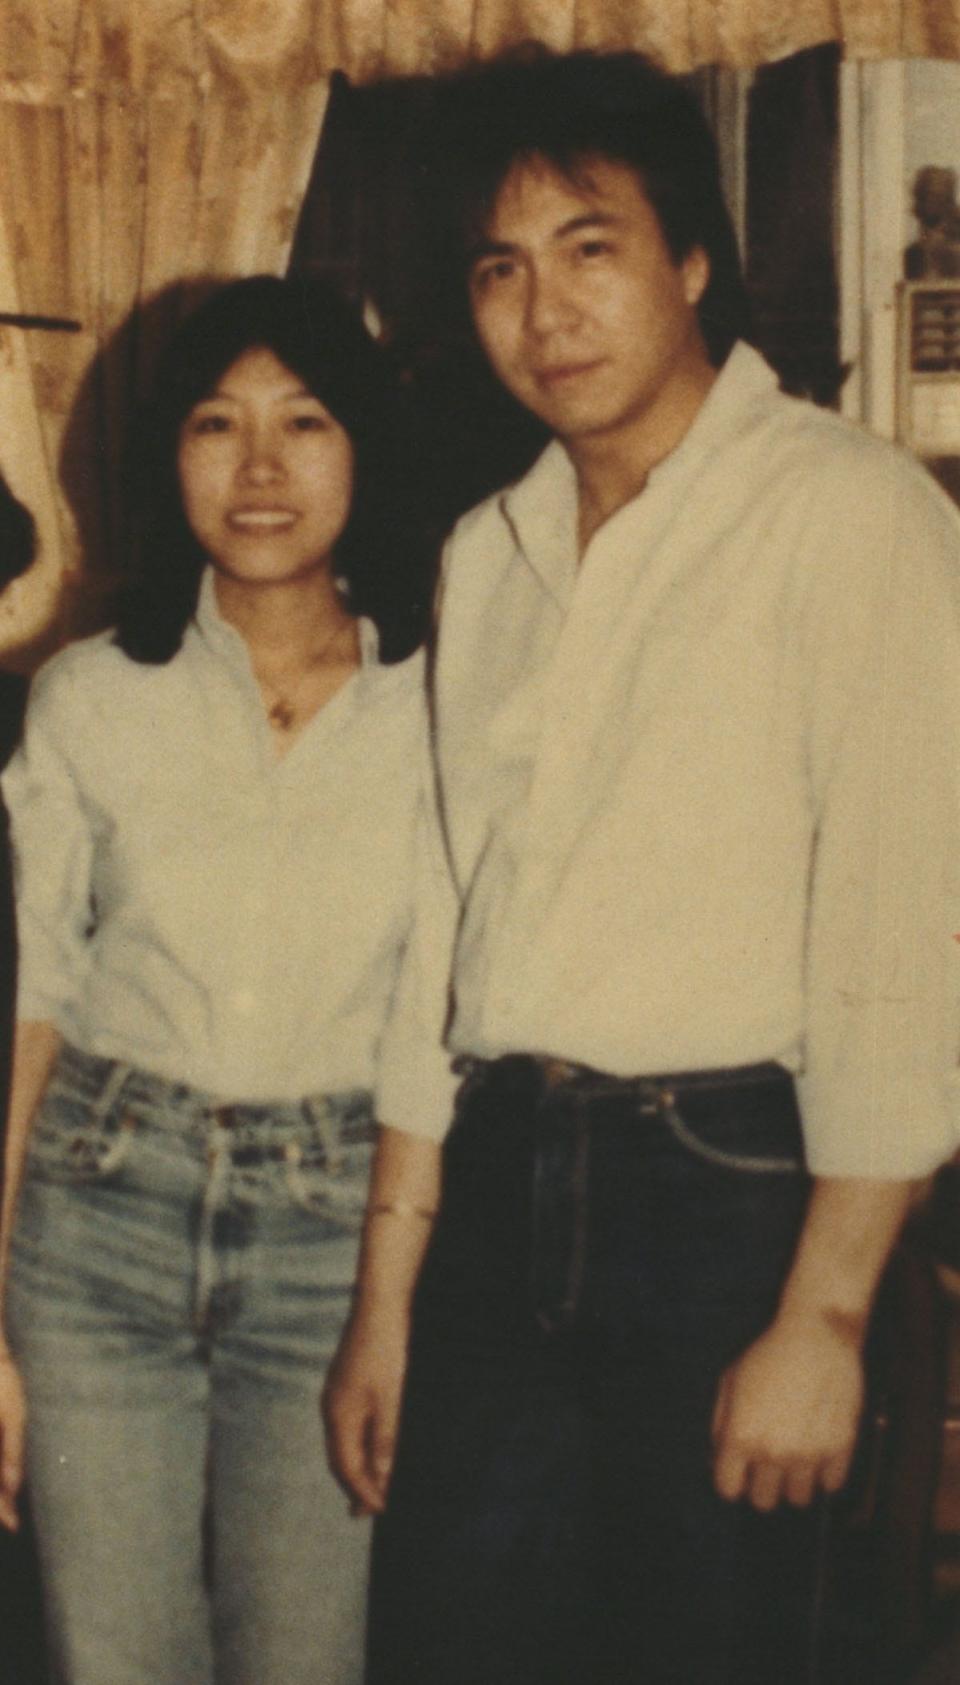 Vickie Wong and Vincent Chin, shown in a family photograph, were to have been married June 28, 1982; nine days before the wedding, he was fatally beaten.